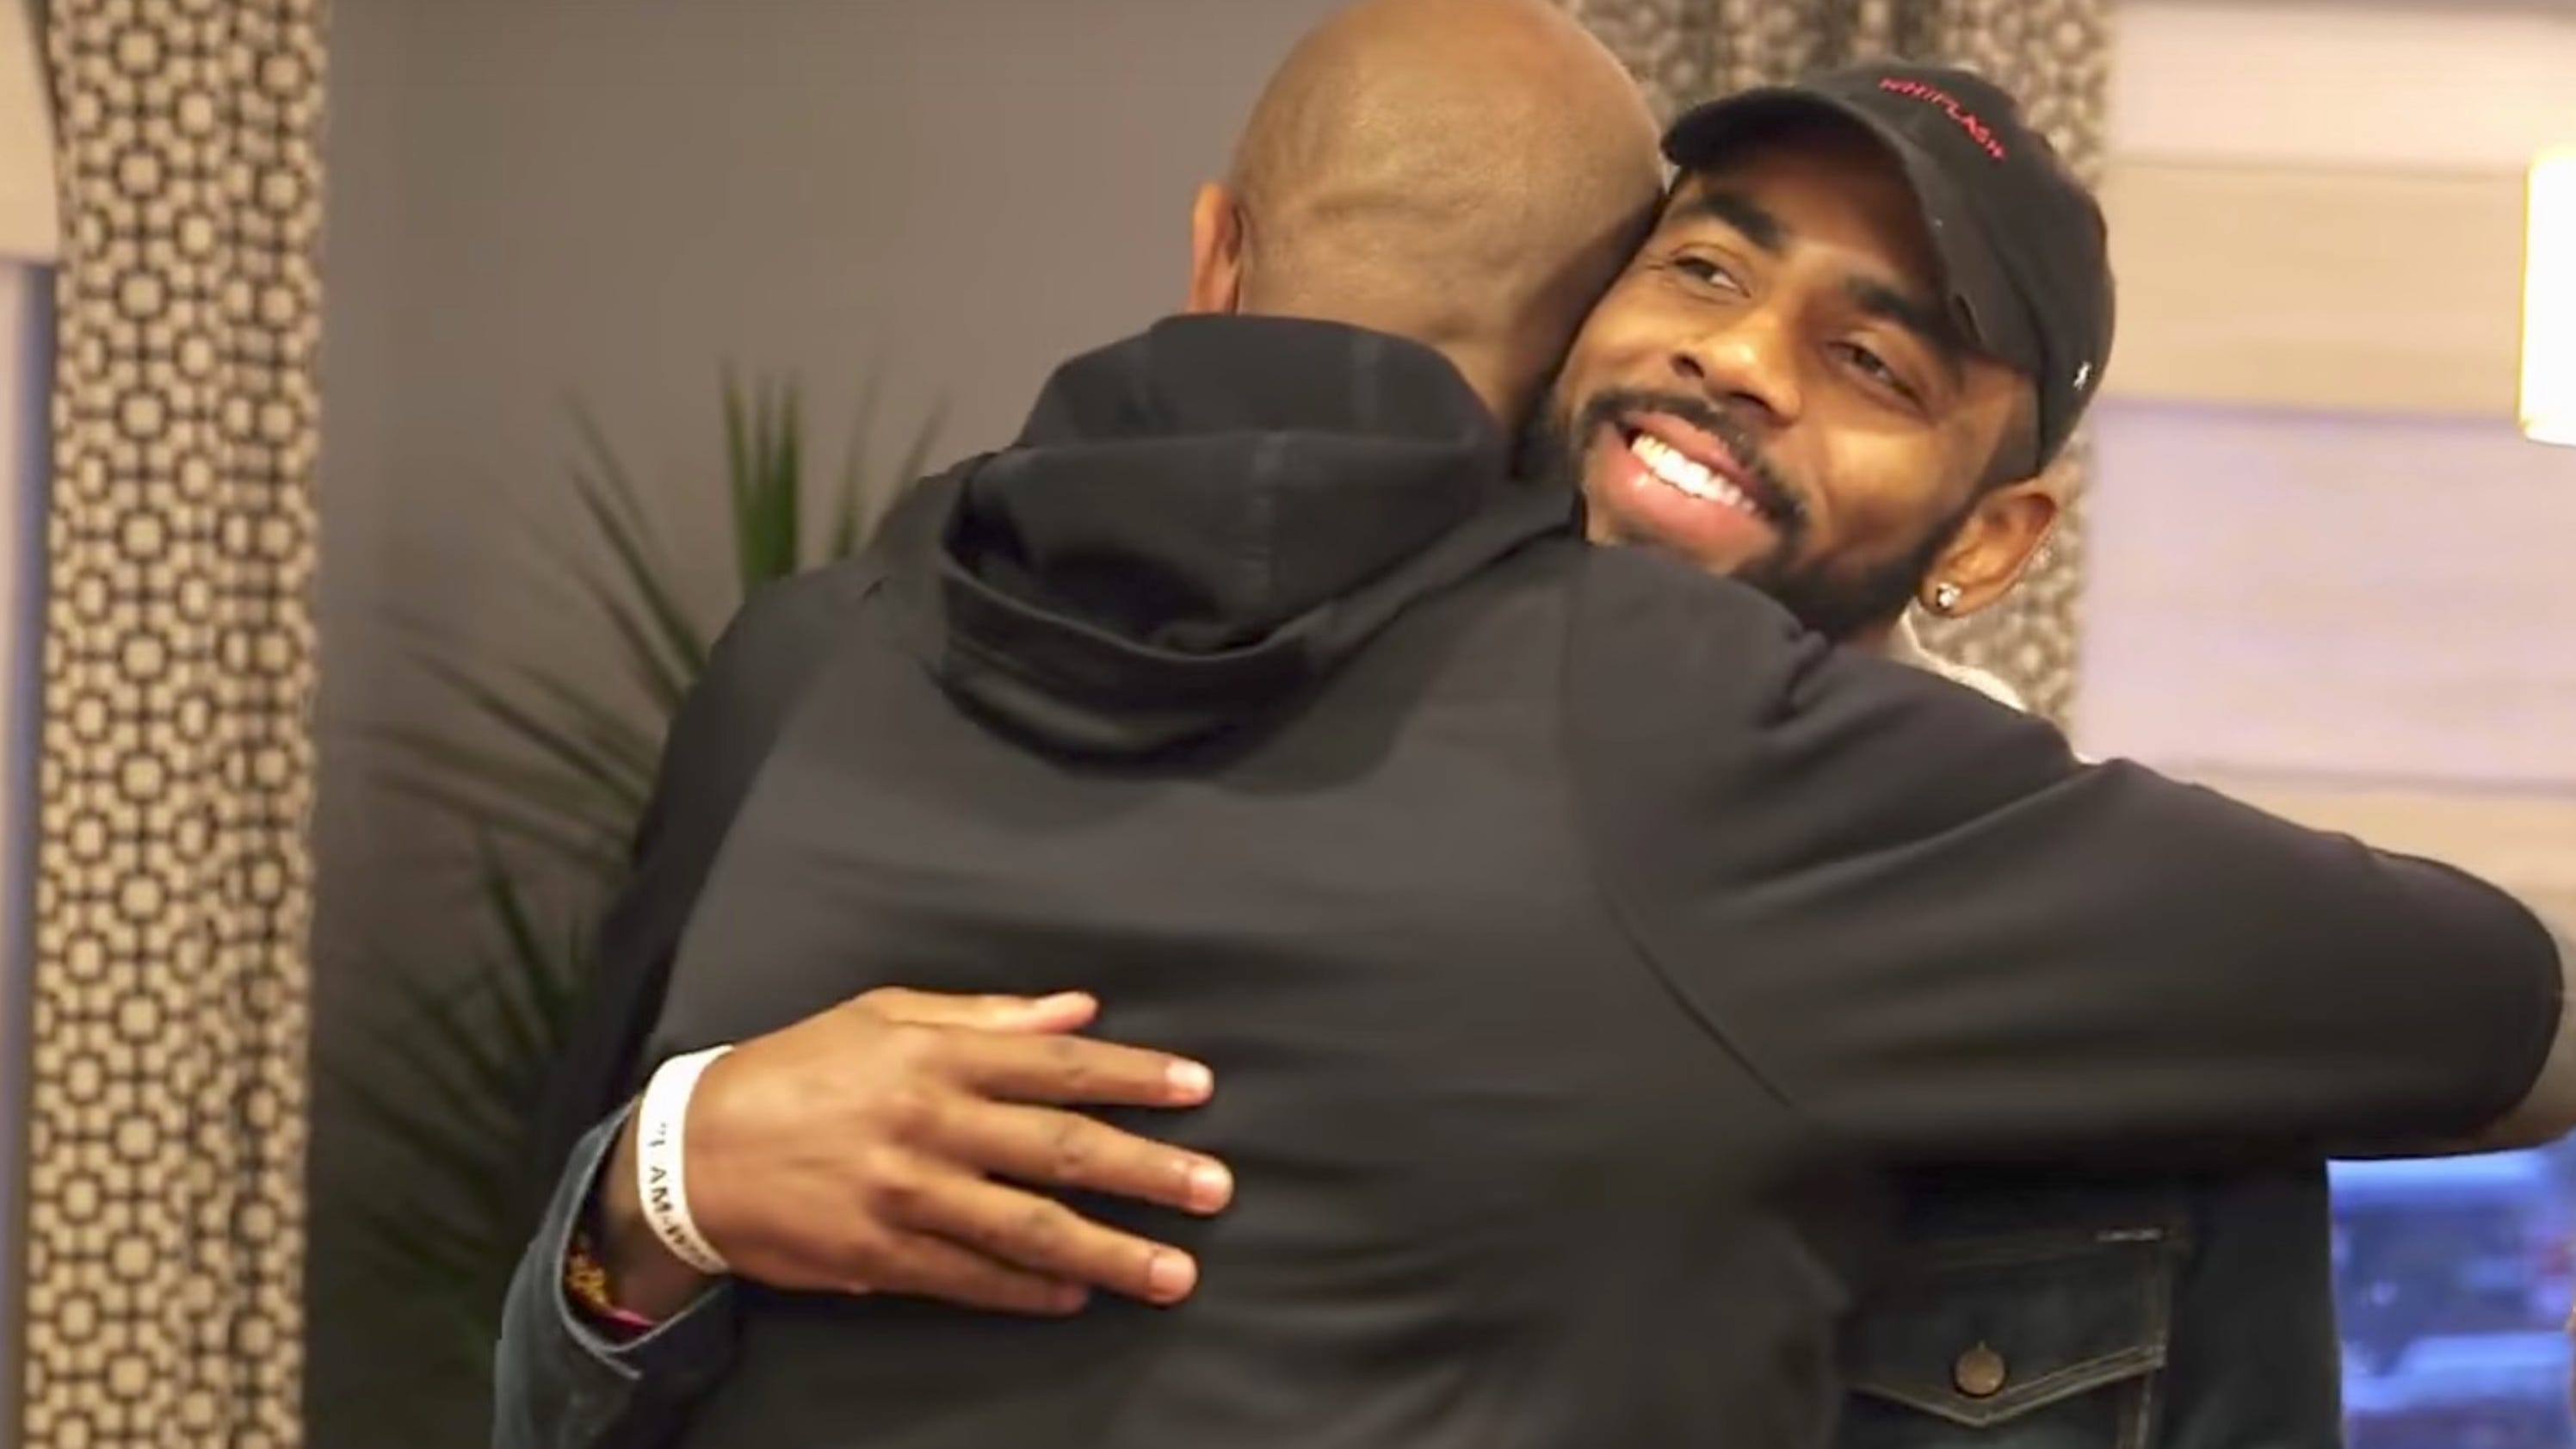 Kyrie Irving surprises dad with home renovation3200 x 1680